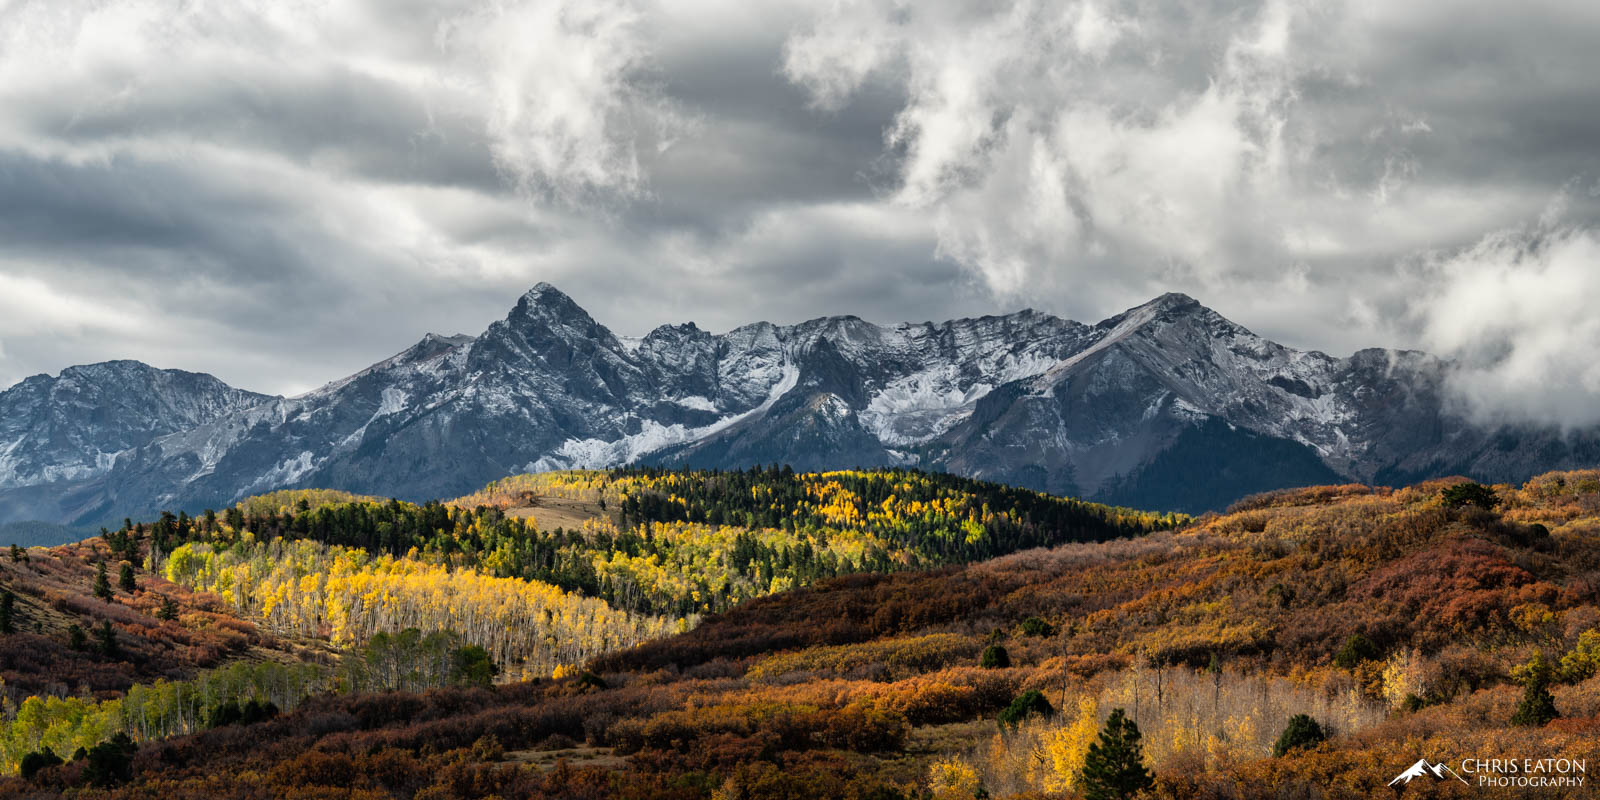 Stormy clouds over the Mt. Sneffels Range and fall color aspen trees in the San Juan Mountains of Colorado.